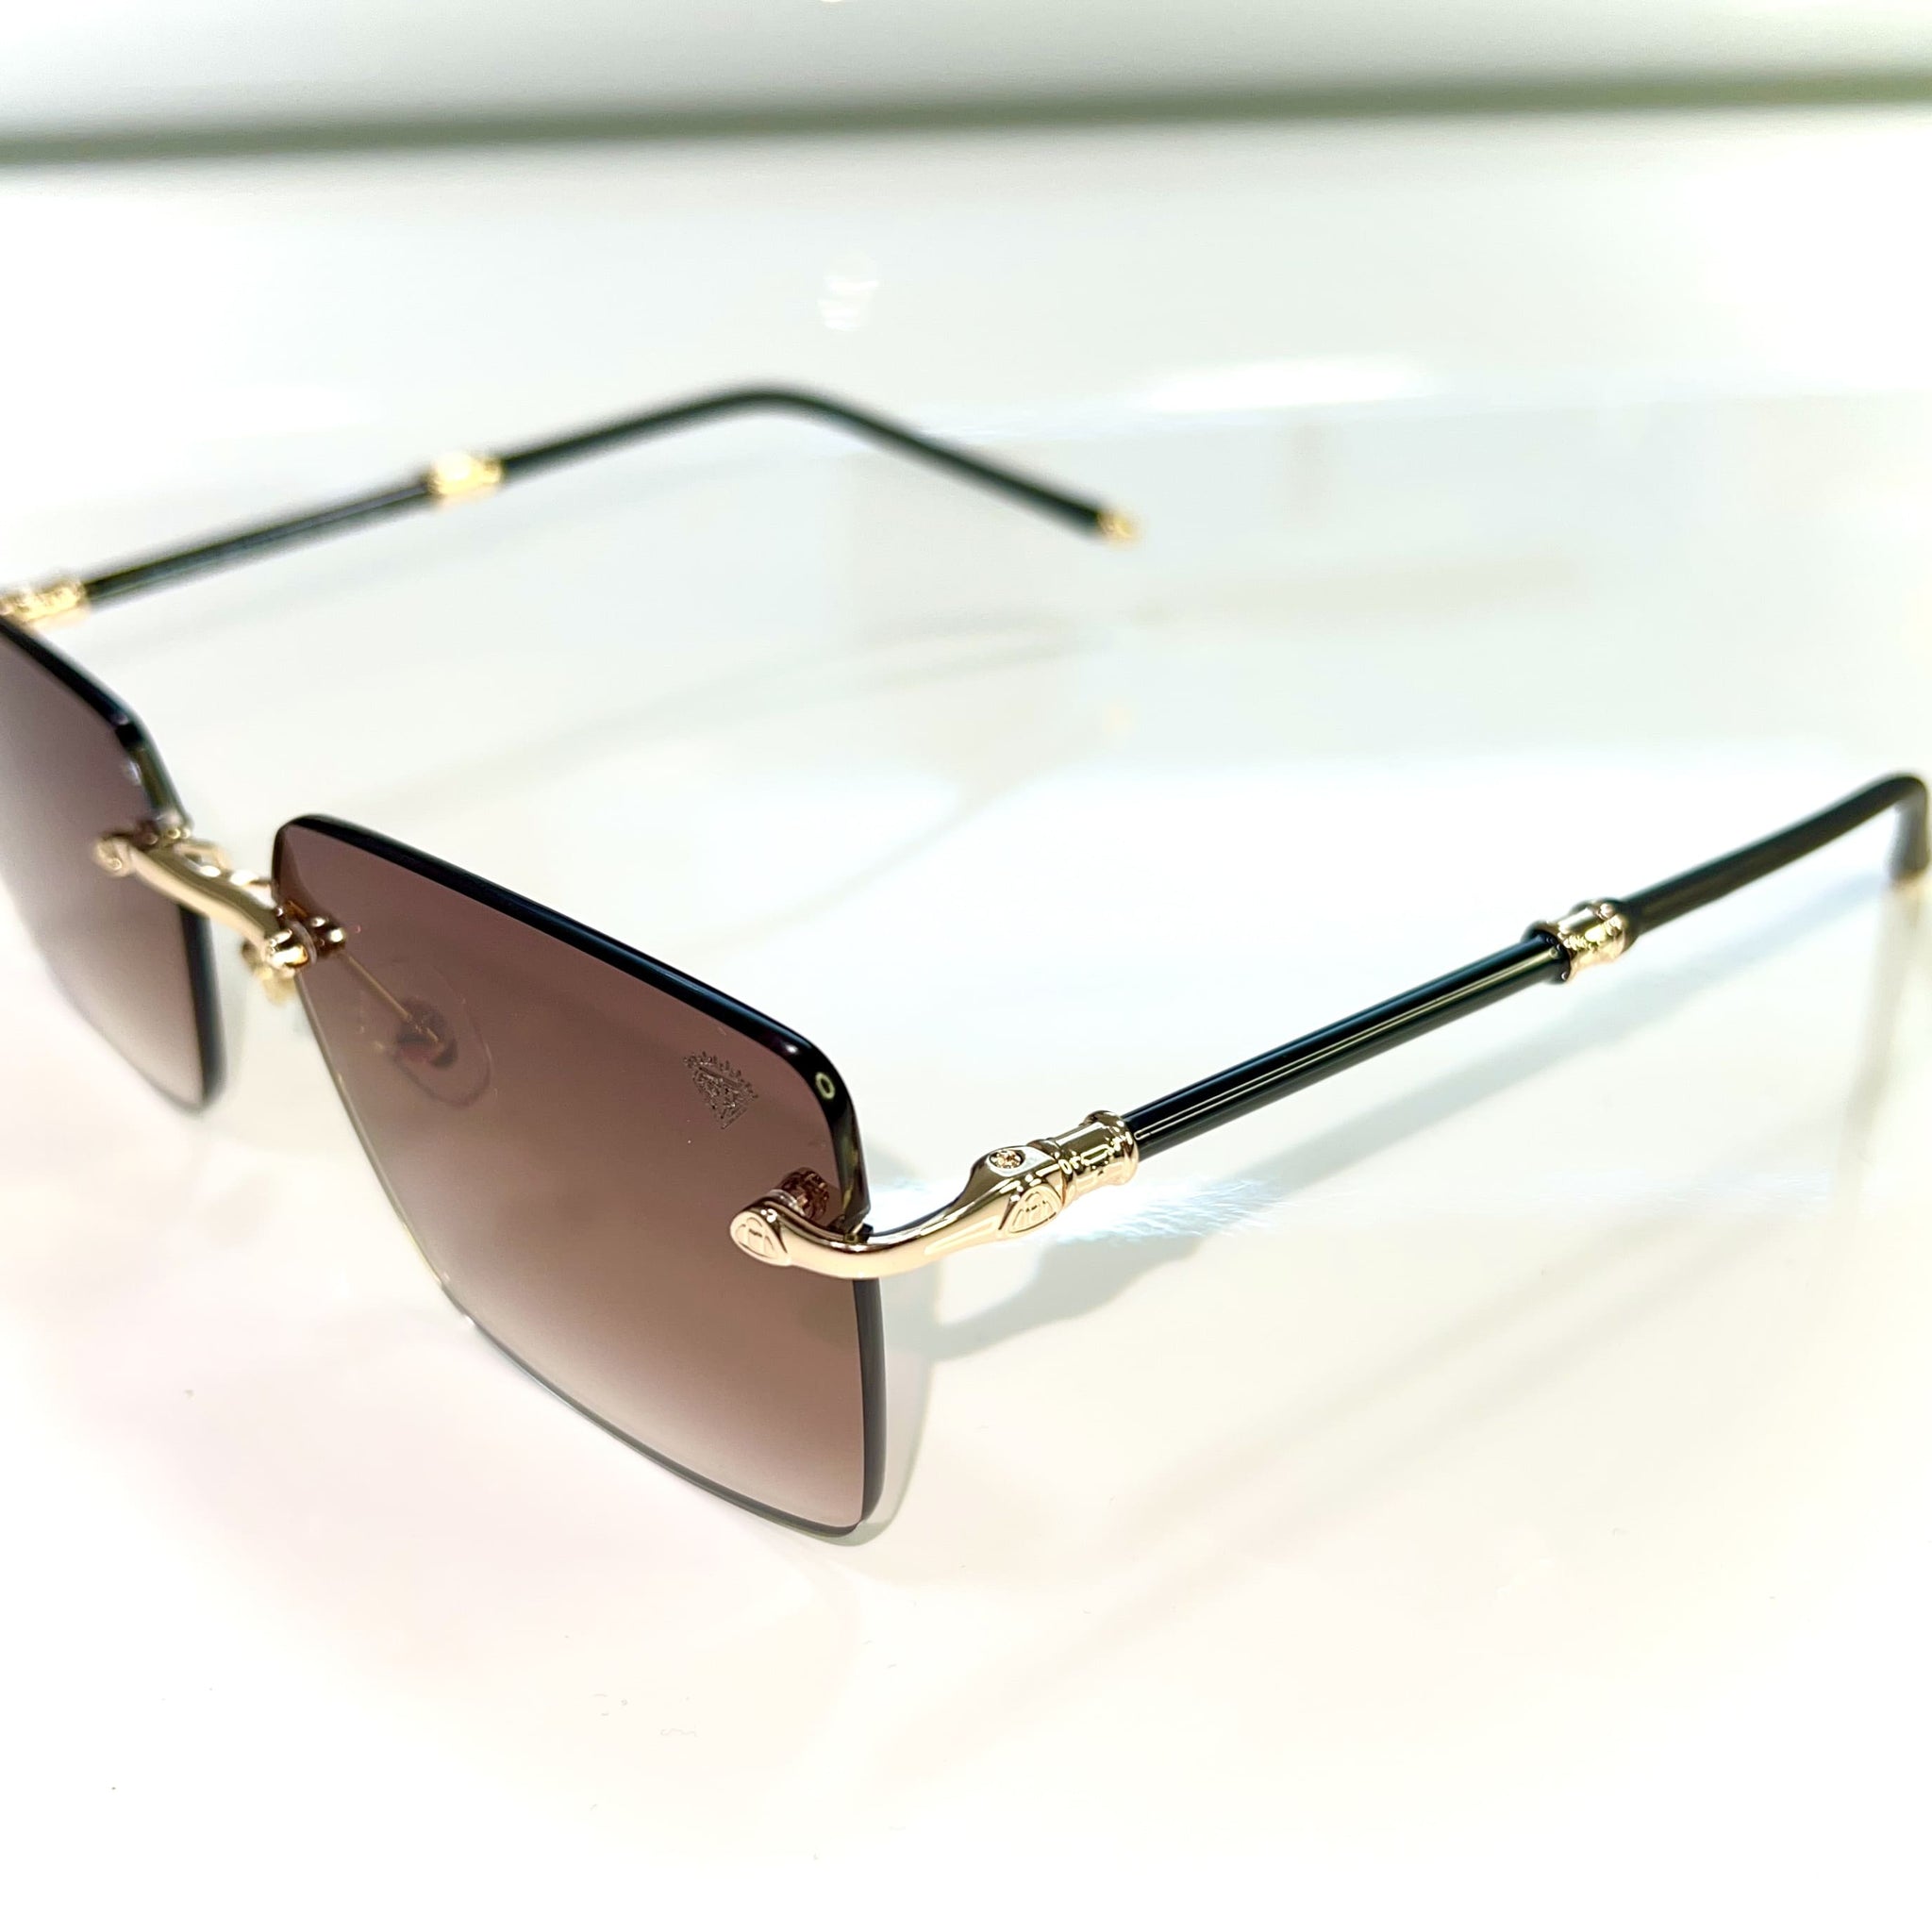 Eduardo Glasses - 14k gold plated + Silicon side - Brown Shade - Sehgal Glasses